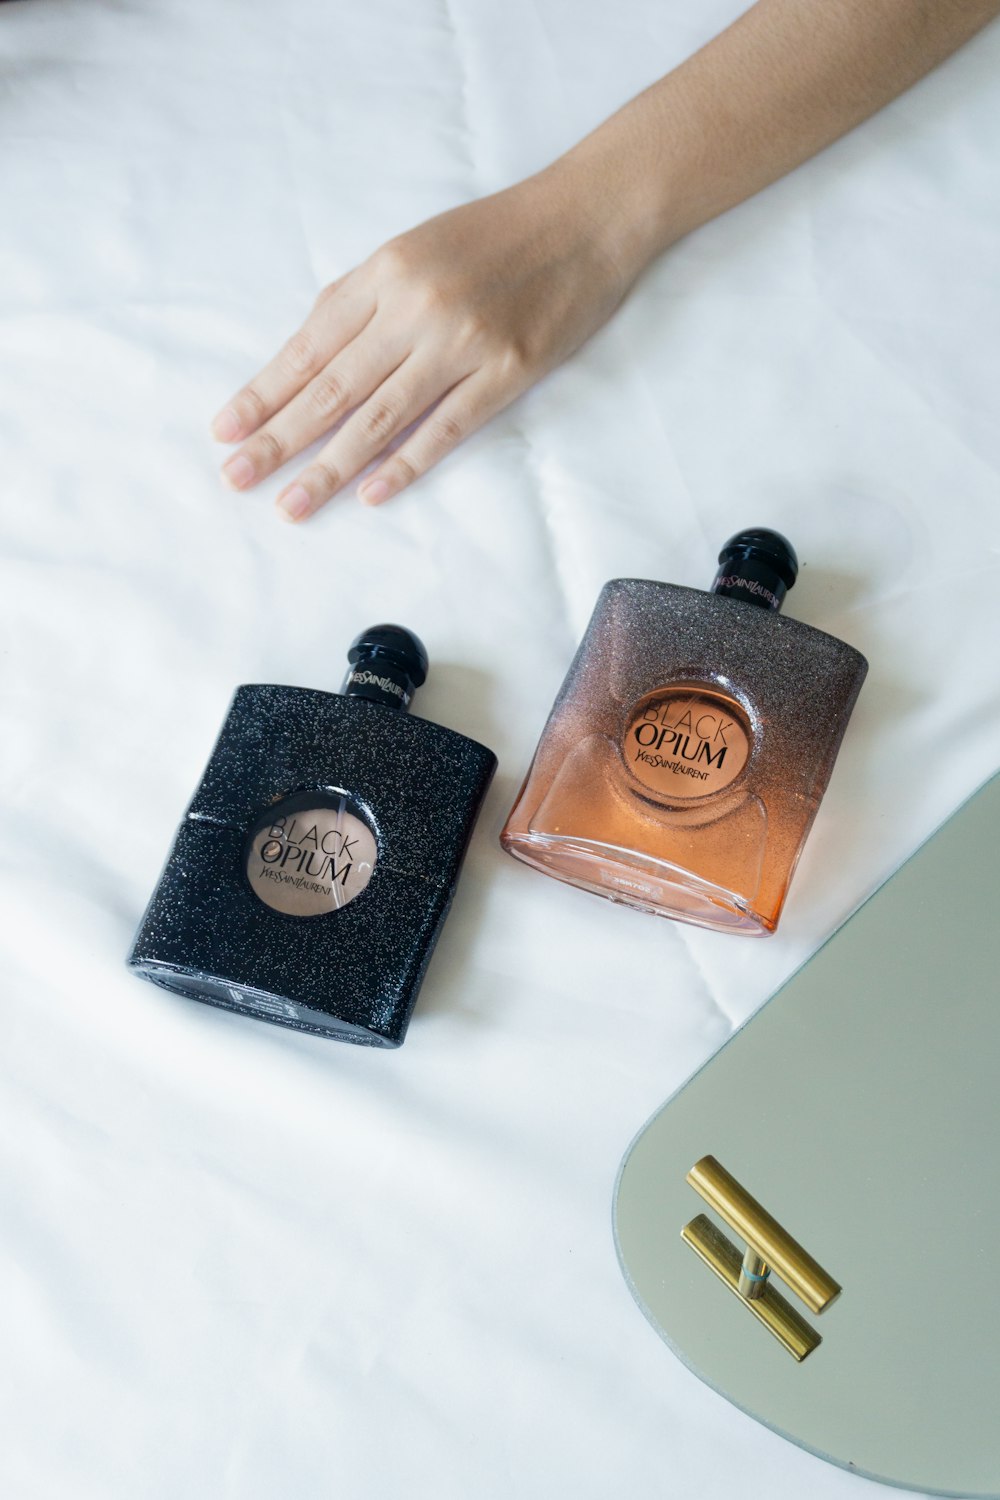 a person's hand on top of a bed next to two bottles of perfume